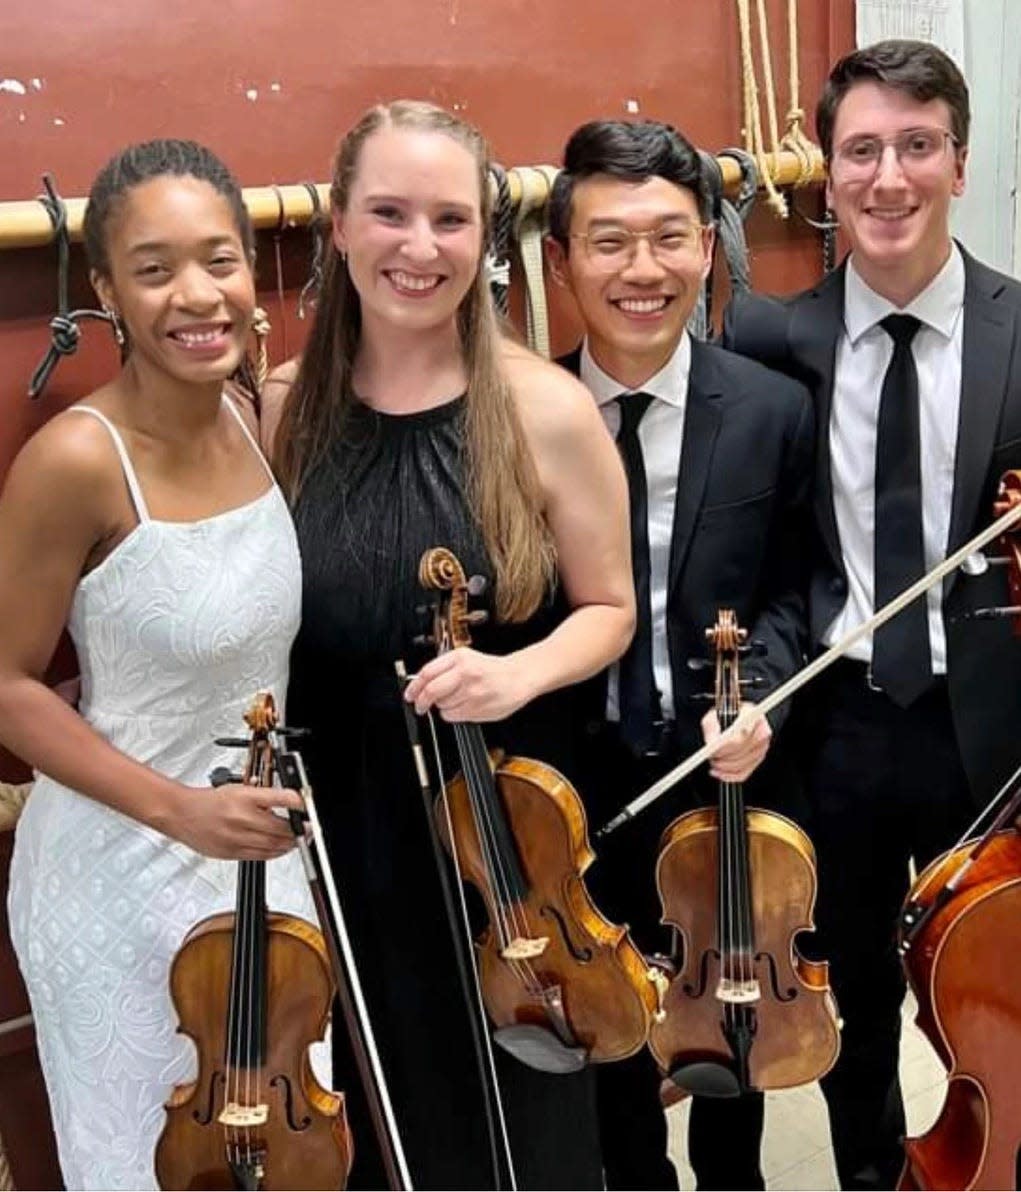 The Juilliard-trained Abeo Quartet will make its Columbus debut on Sunday at the Ohio History Center as part of the Sunday at Central recital series.